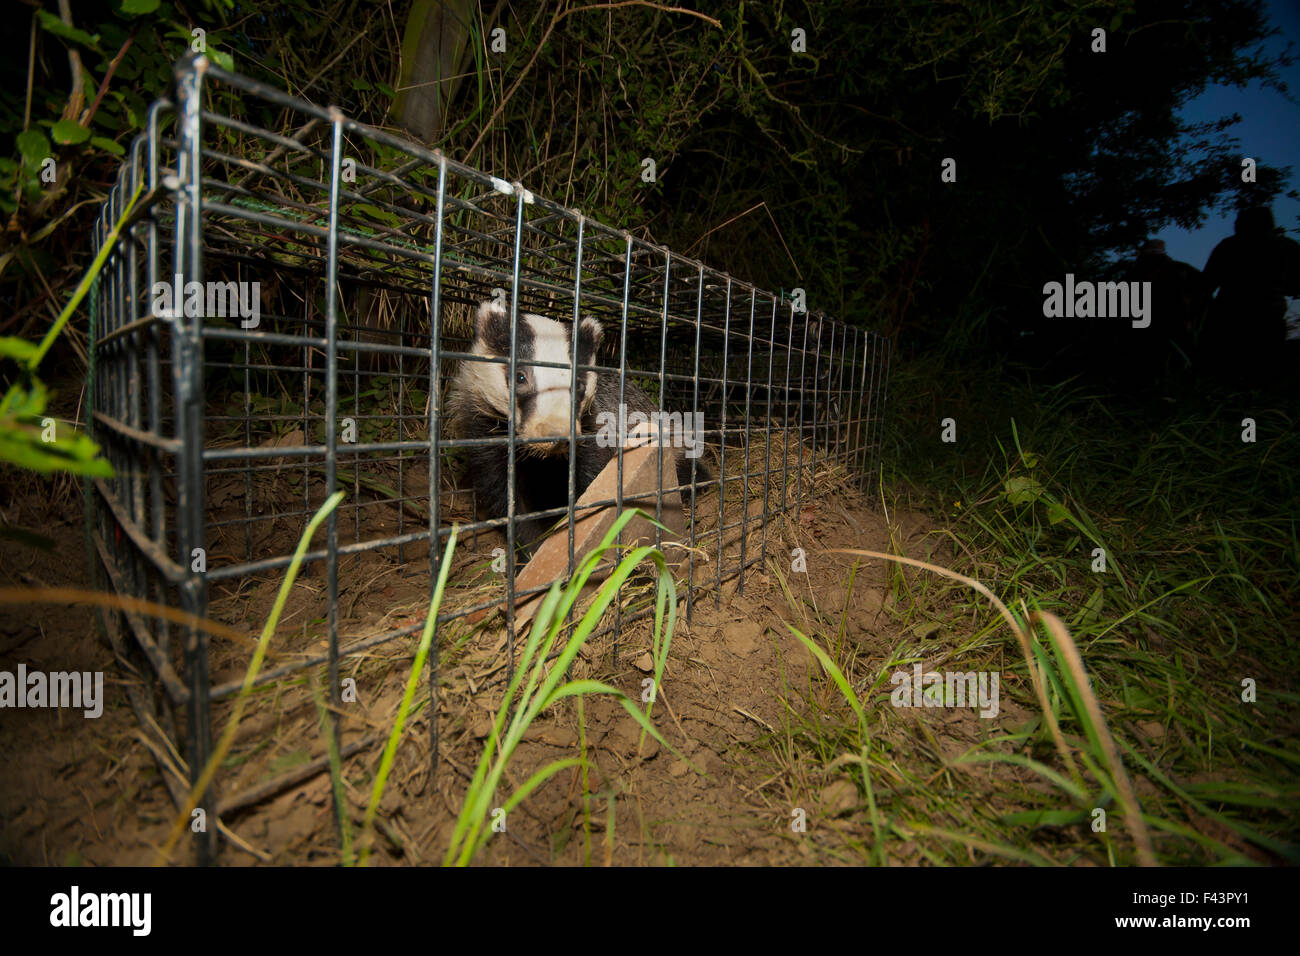 A European Badger (Meles meles) caught in a cage trap awaiting vaccination as part of bovine tuberculosis (bTB) vaccination trials on farmland in Gloucestershire, UK. June 2011. Stock Photo